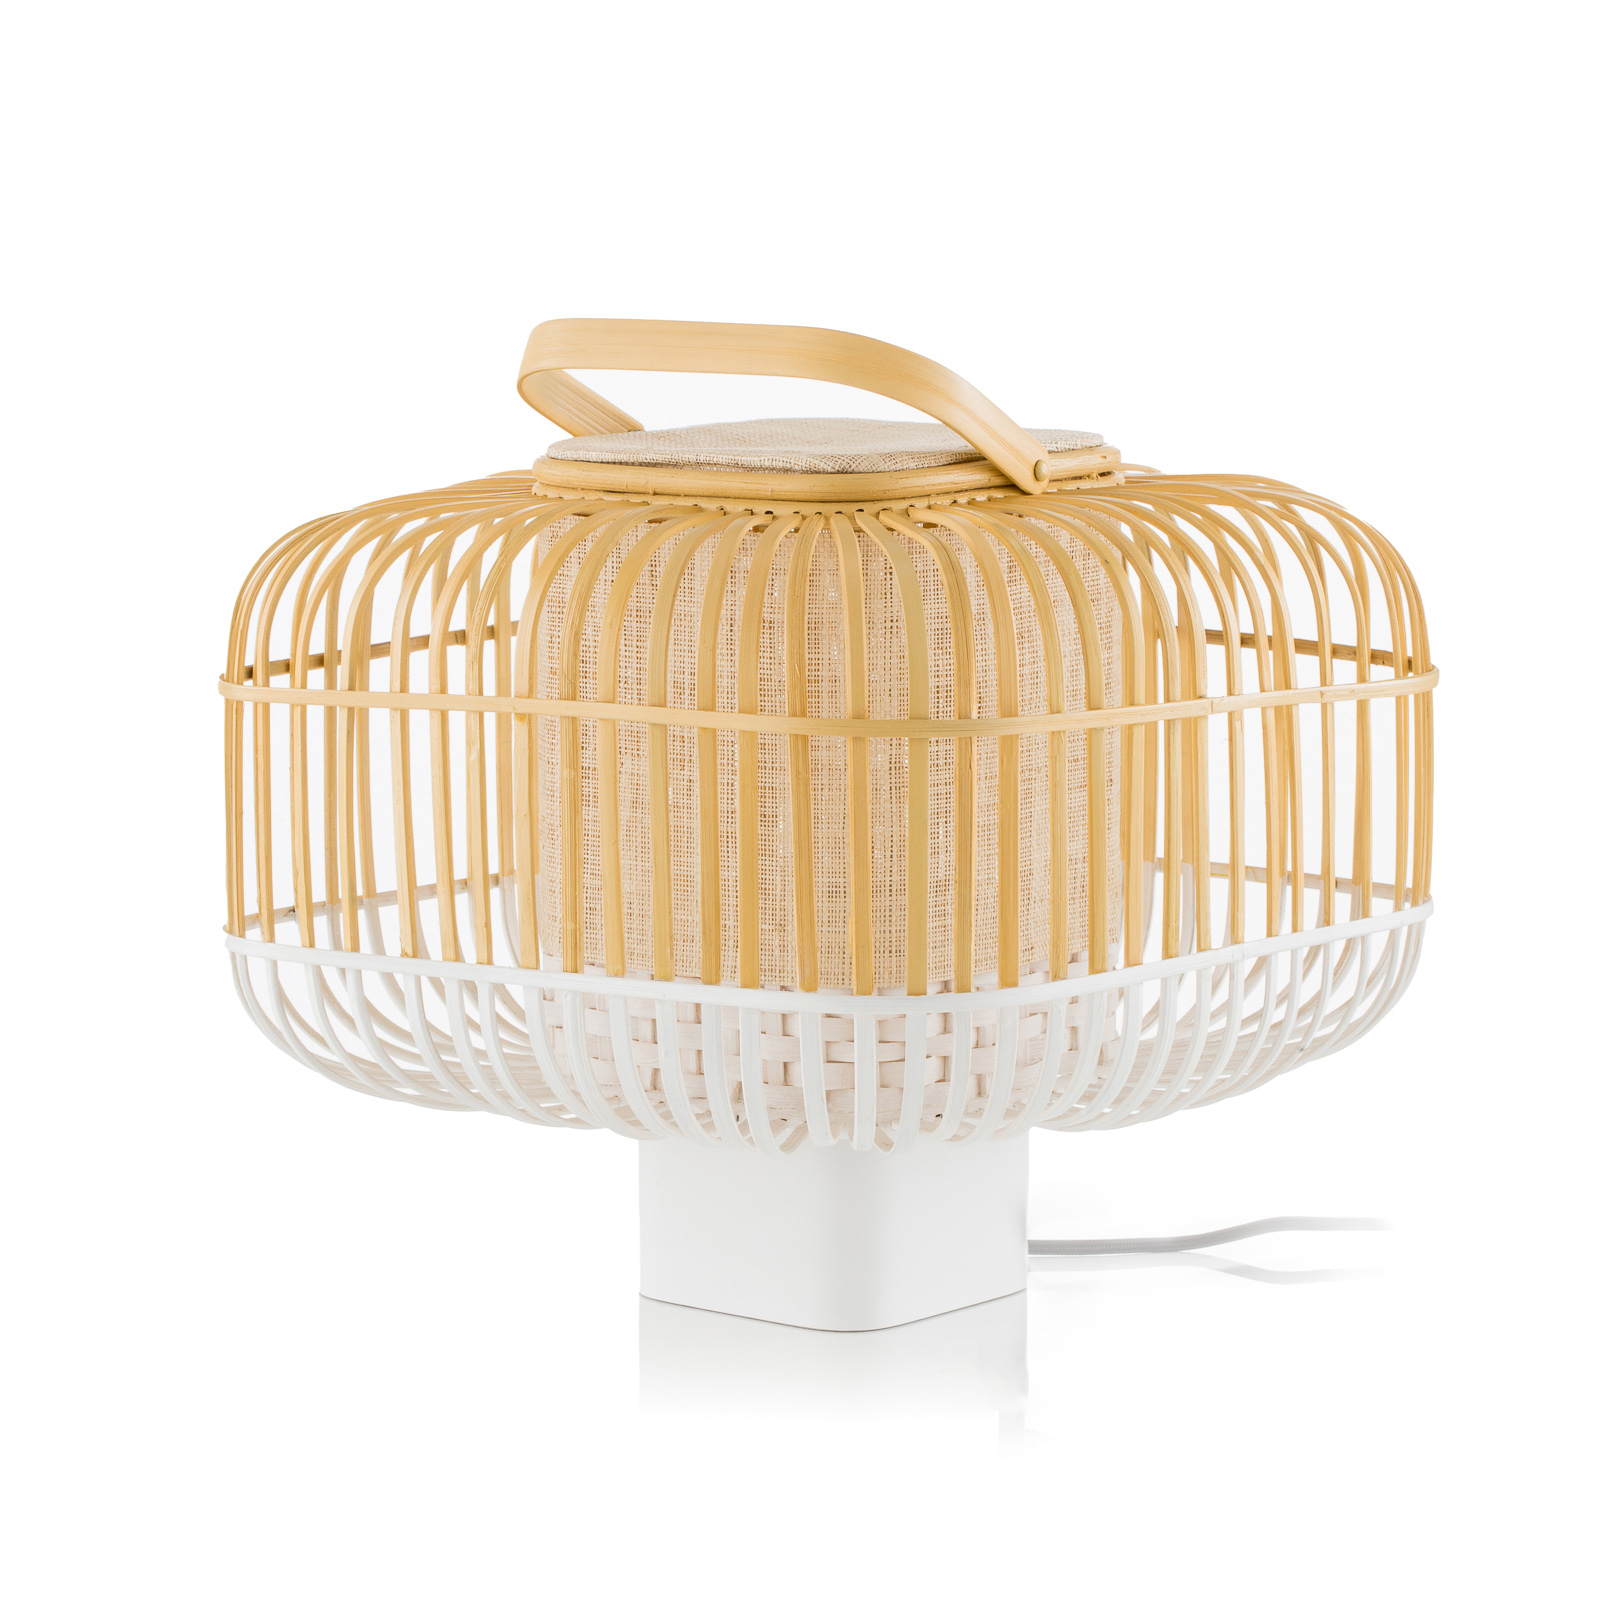 Forestier Bamboo Square S lampe à poser blanche